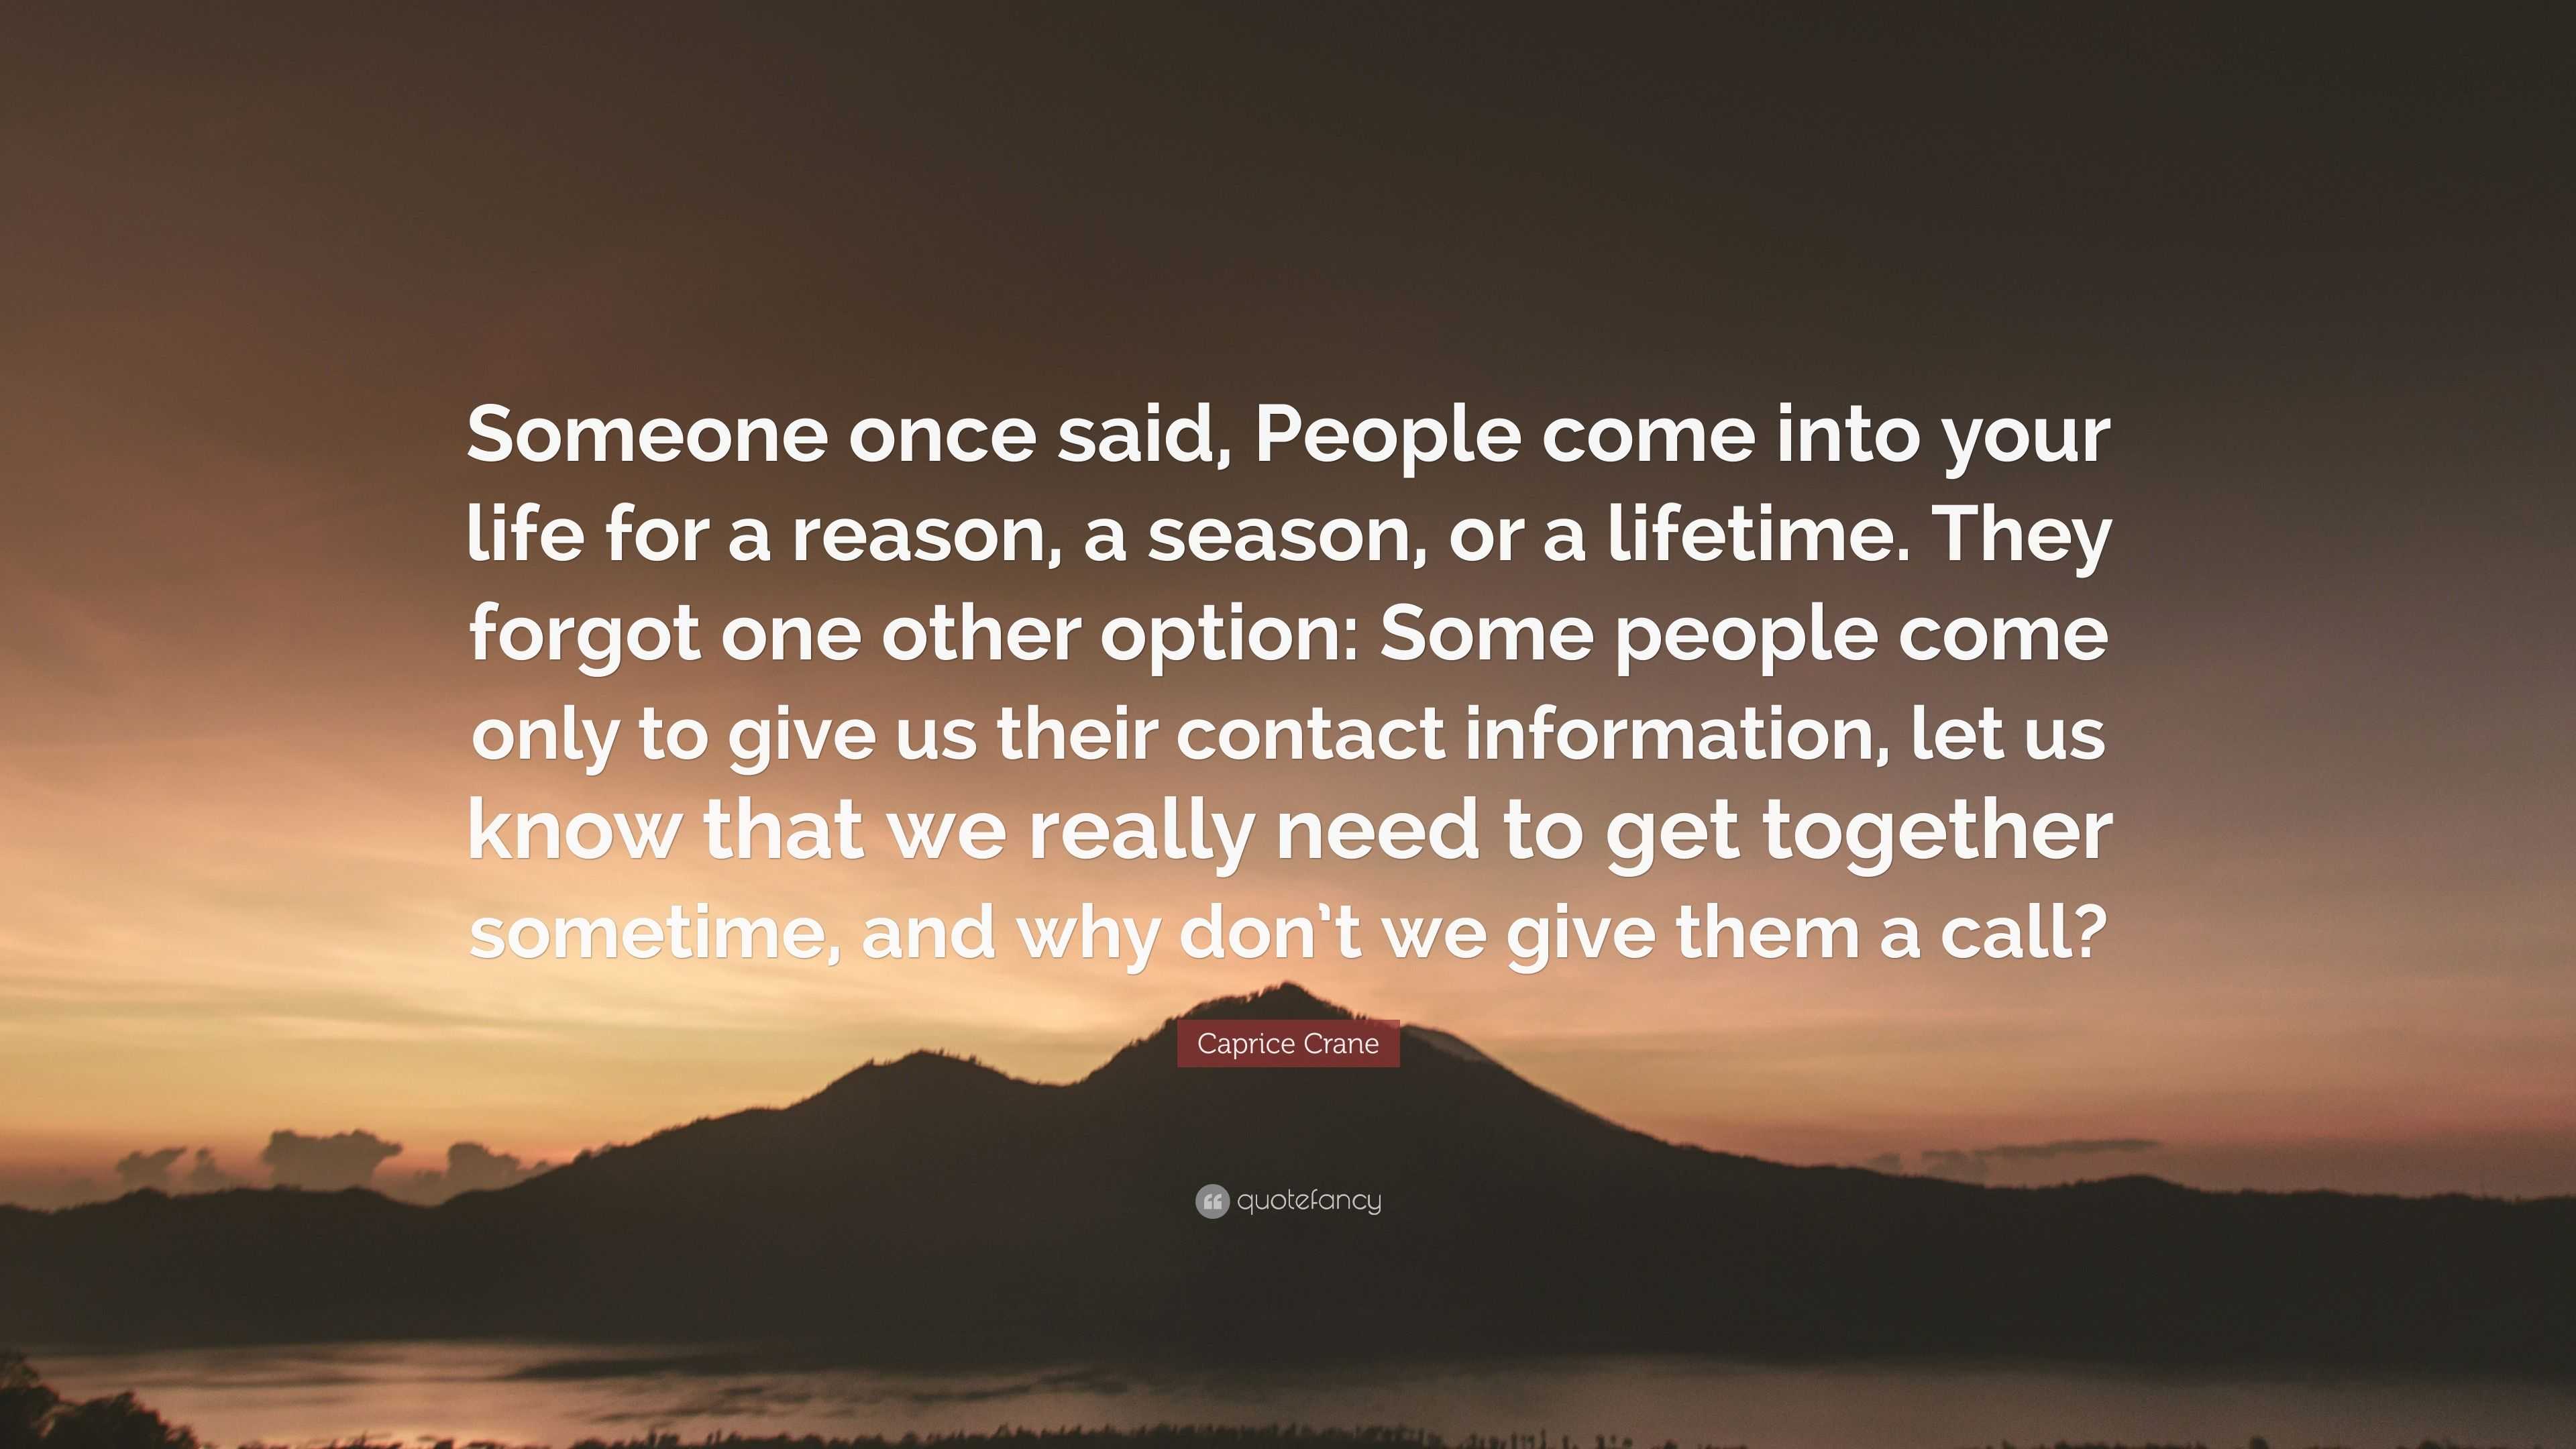 Quotes About Someone Coming Into Your Life - Indira Minnaminnie